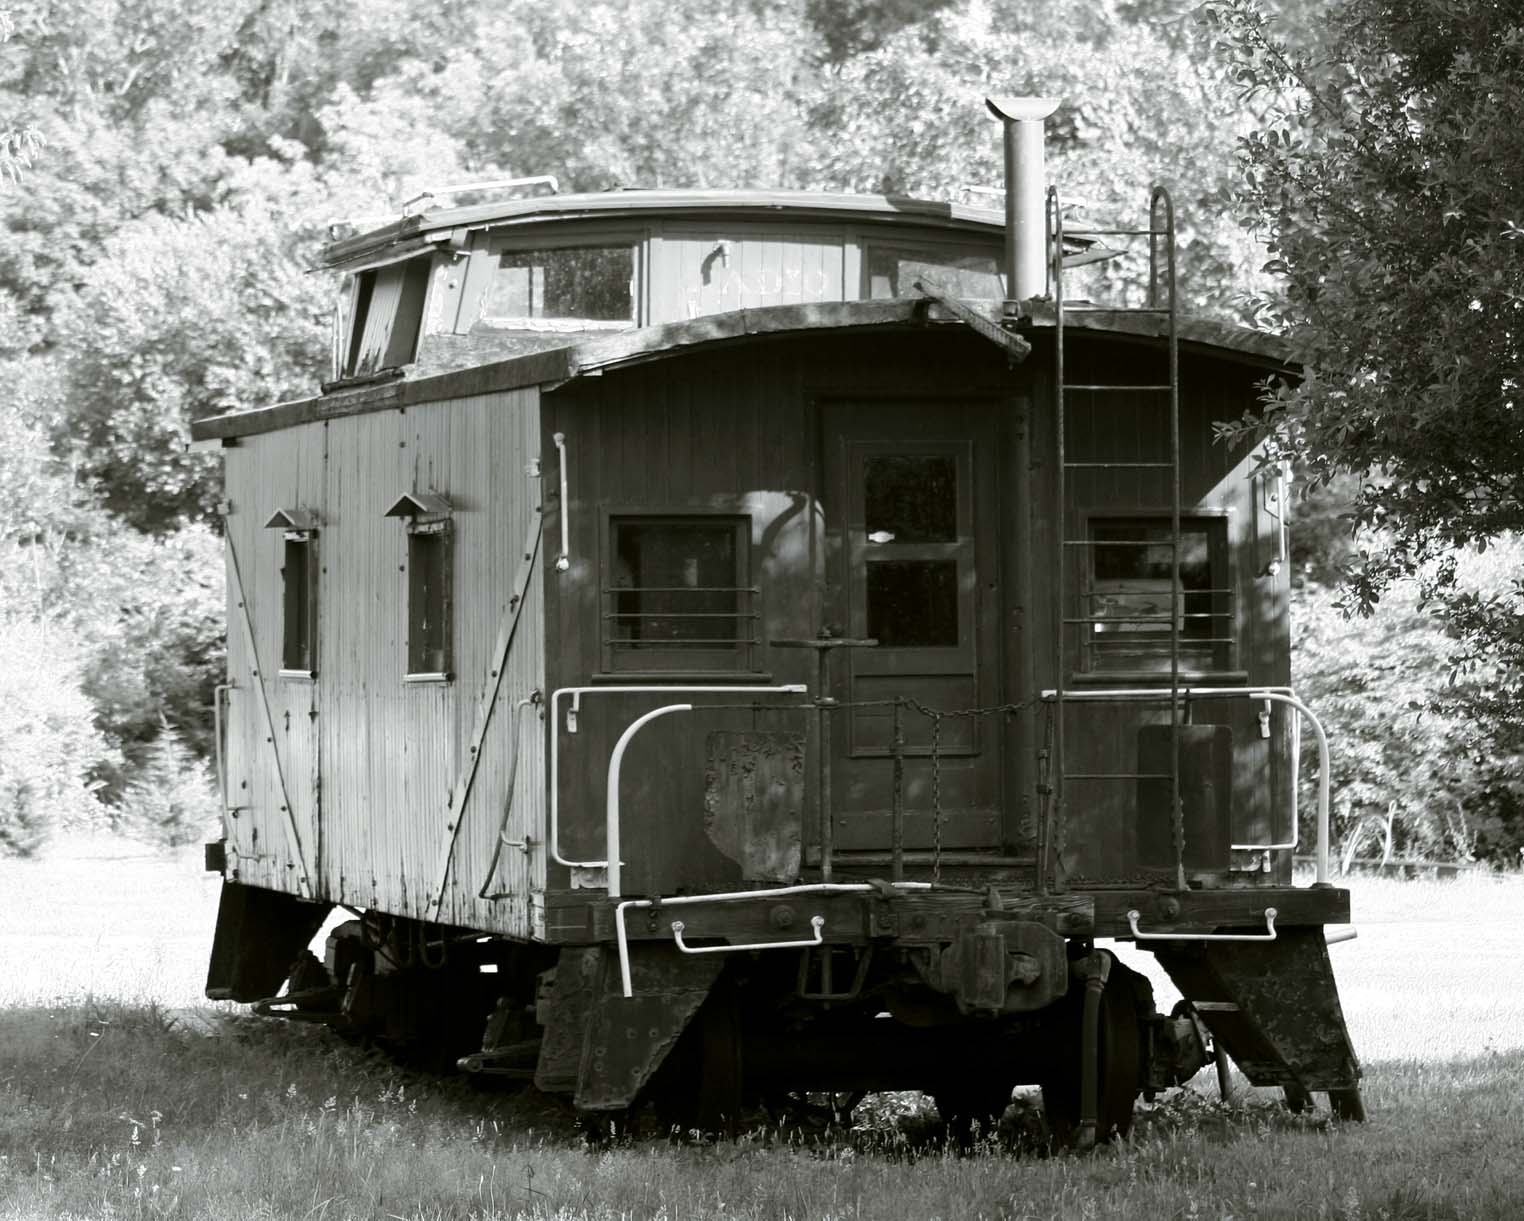 MG_8630_The_old_Wooden_Caboose